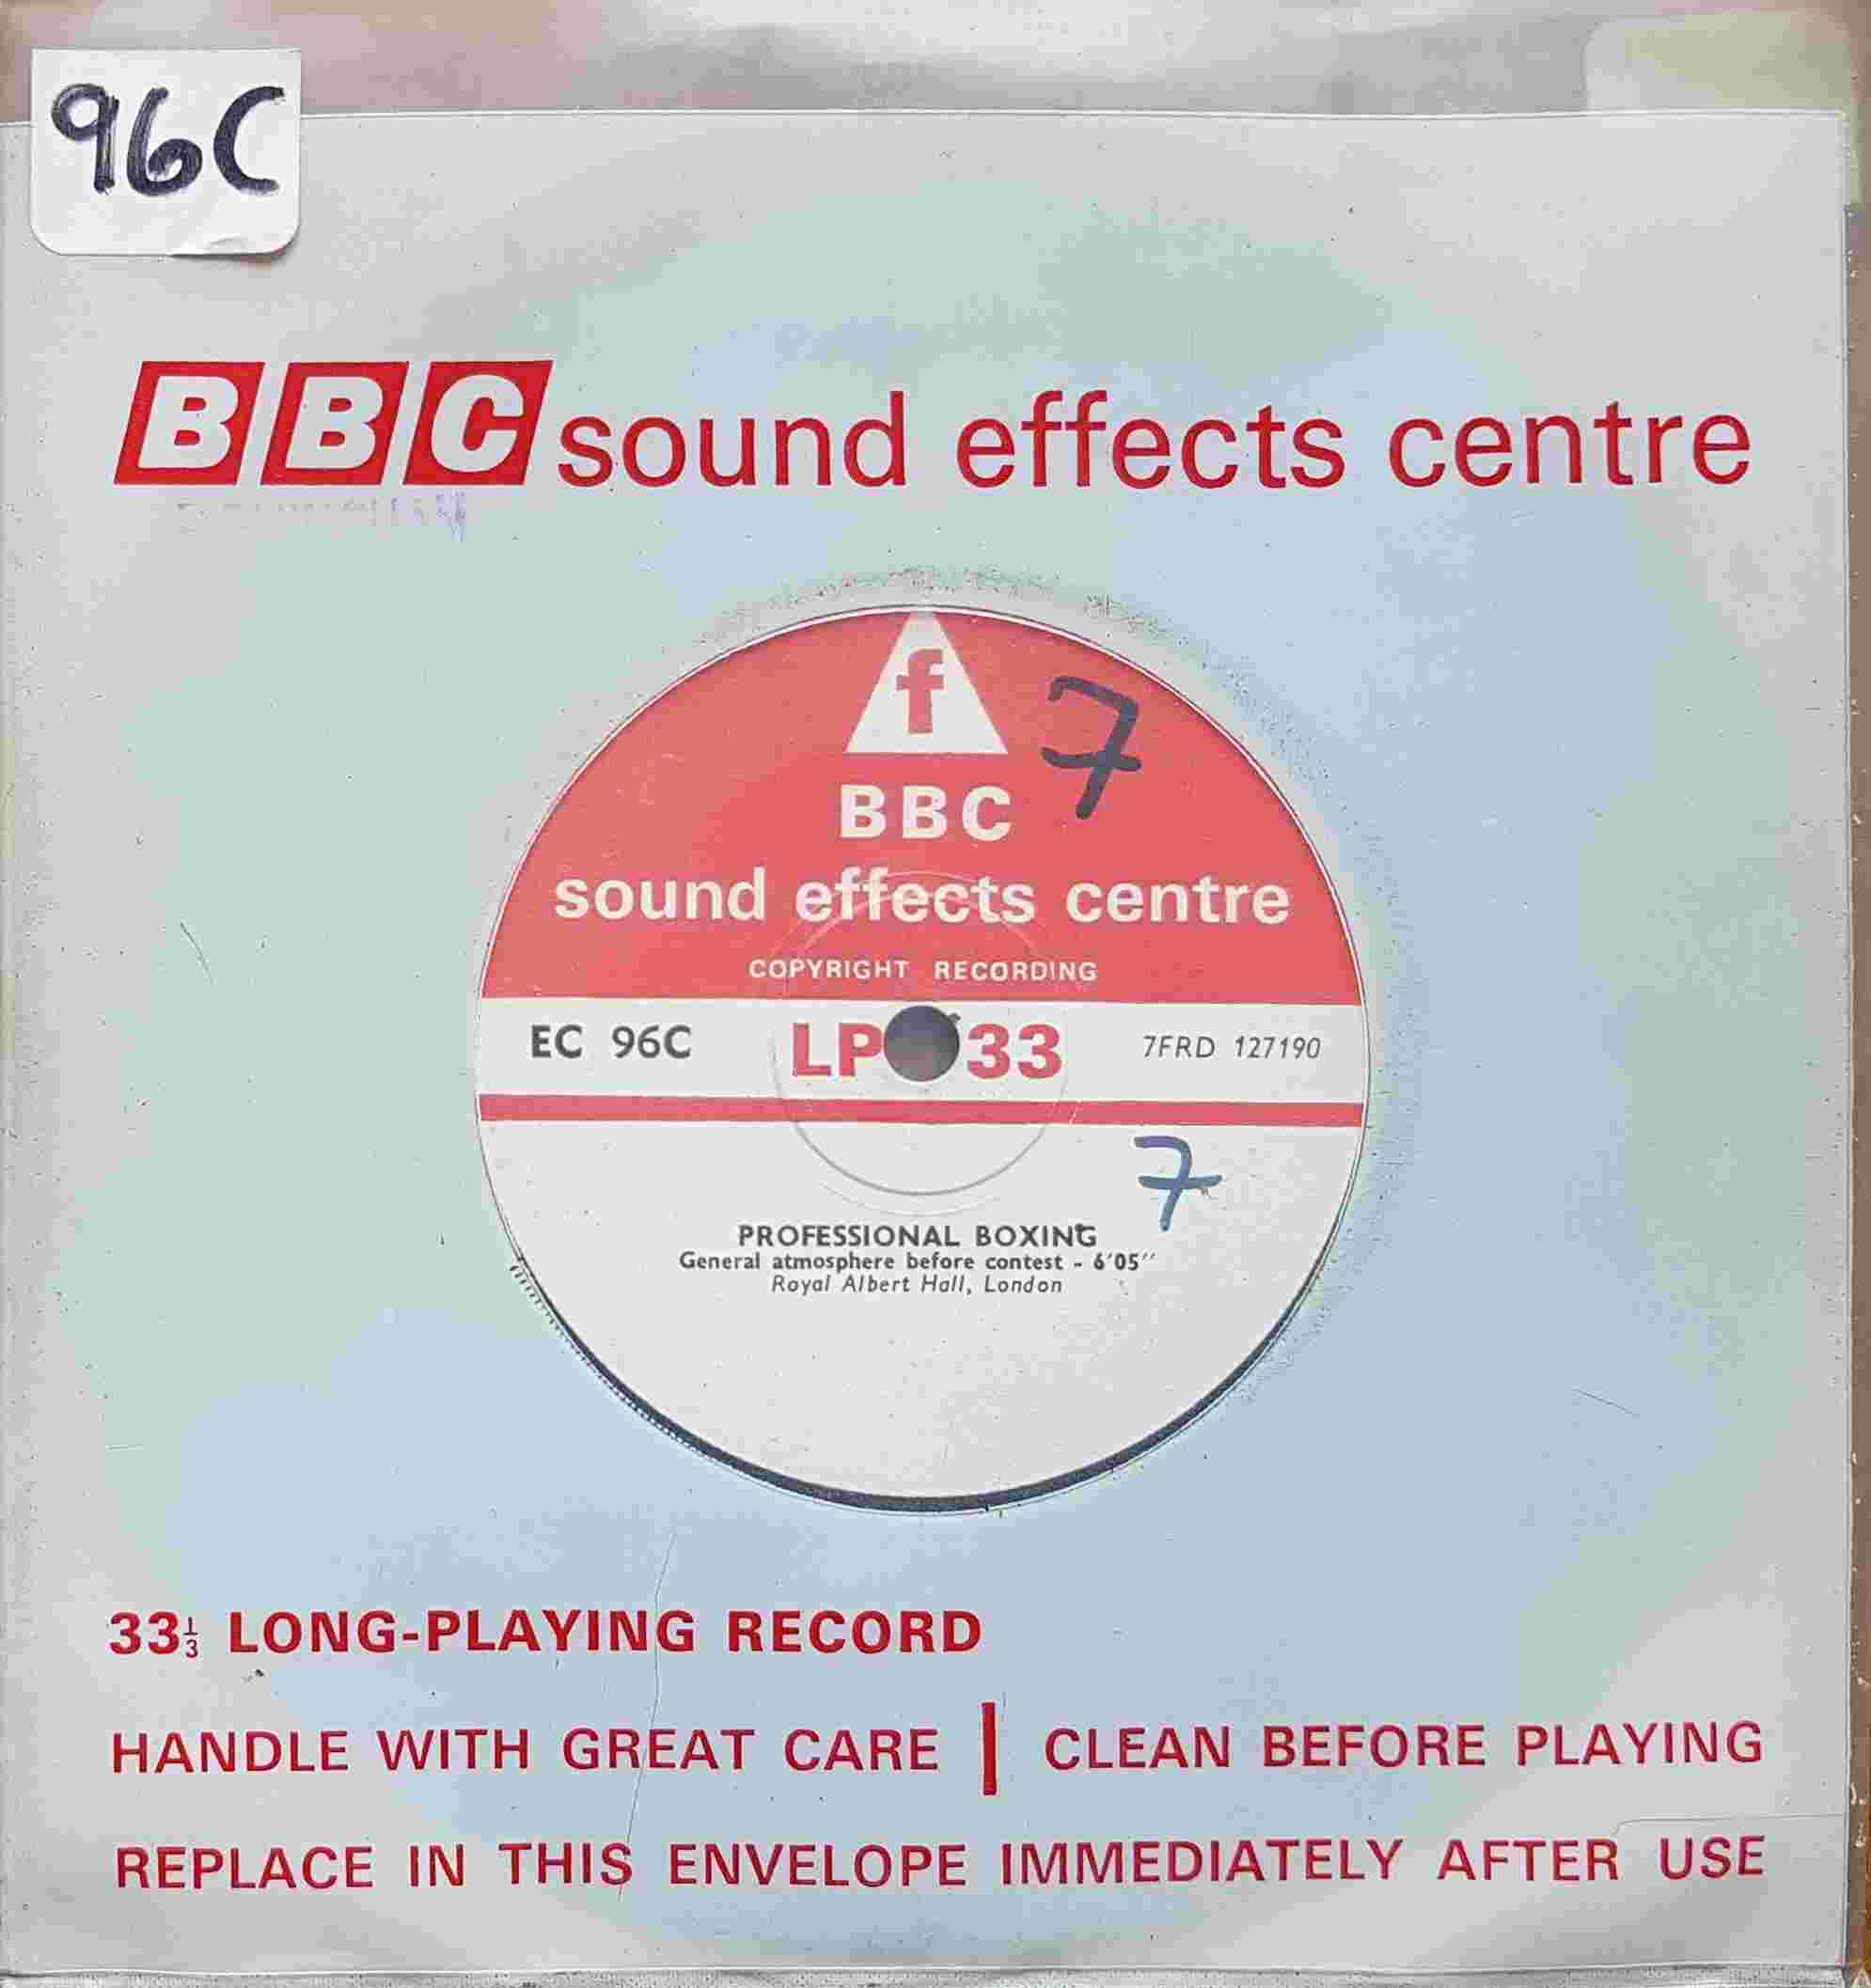 Picture of EC 96C Professional boxing - Royal Albert Hall, London by artist Not registered from the BBC singles - Records and Tapes library